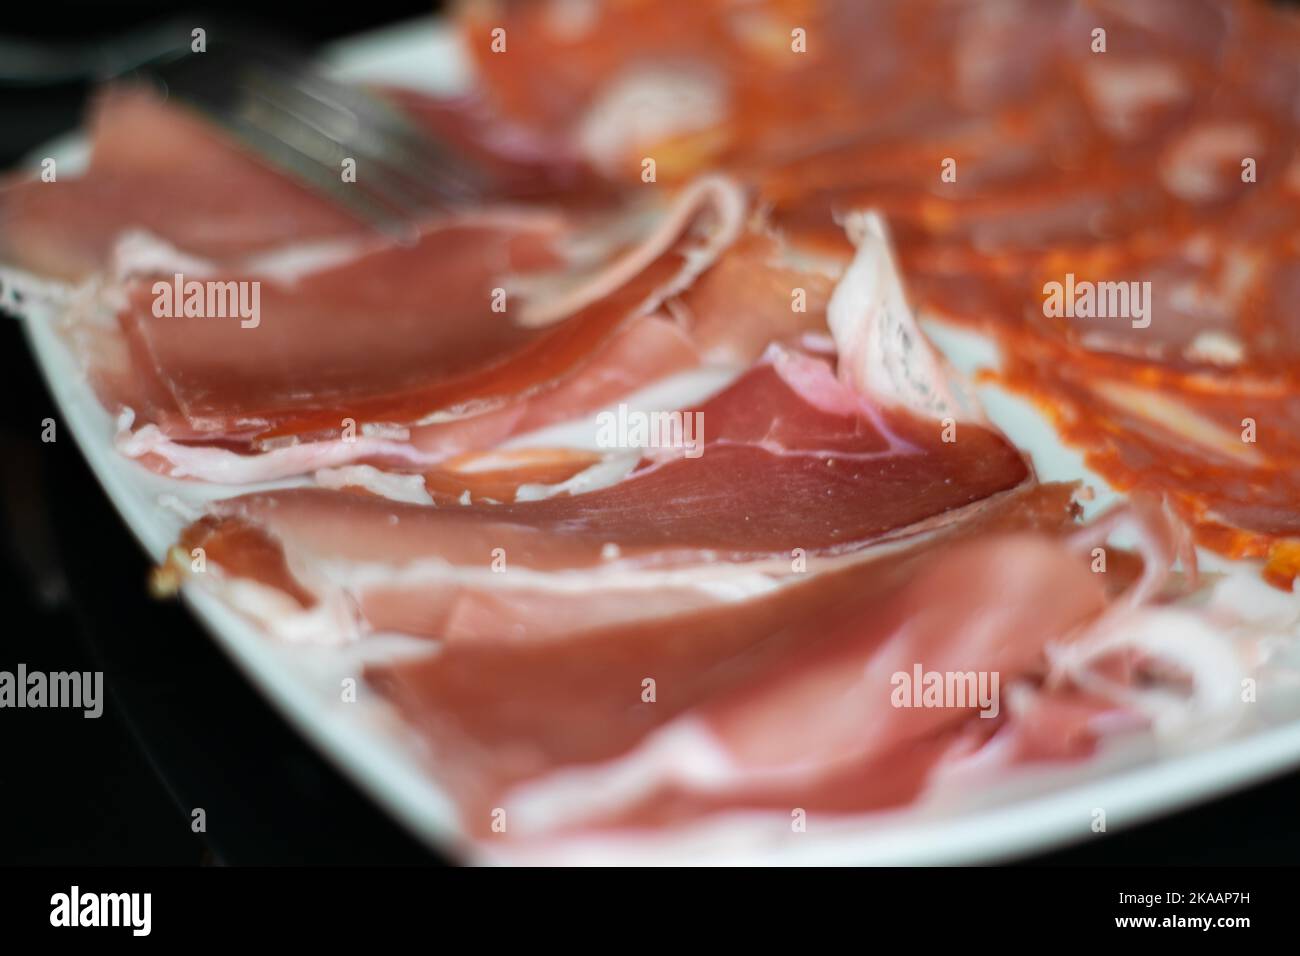 Tapas food, raclette and smoked ham and chorizo. Portuguese food and flavors. Stock Photo